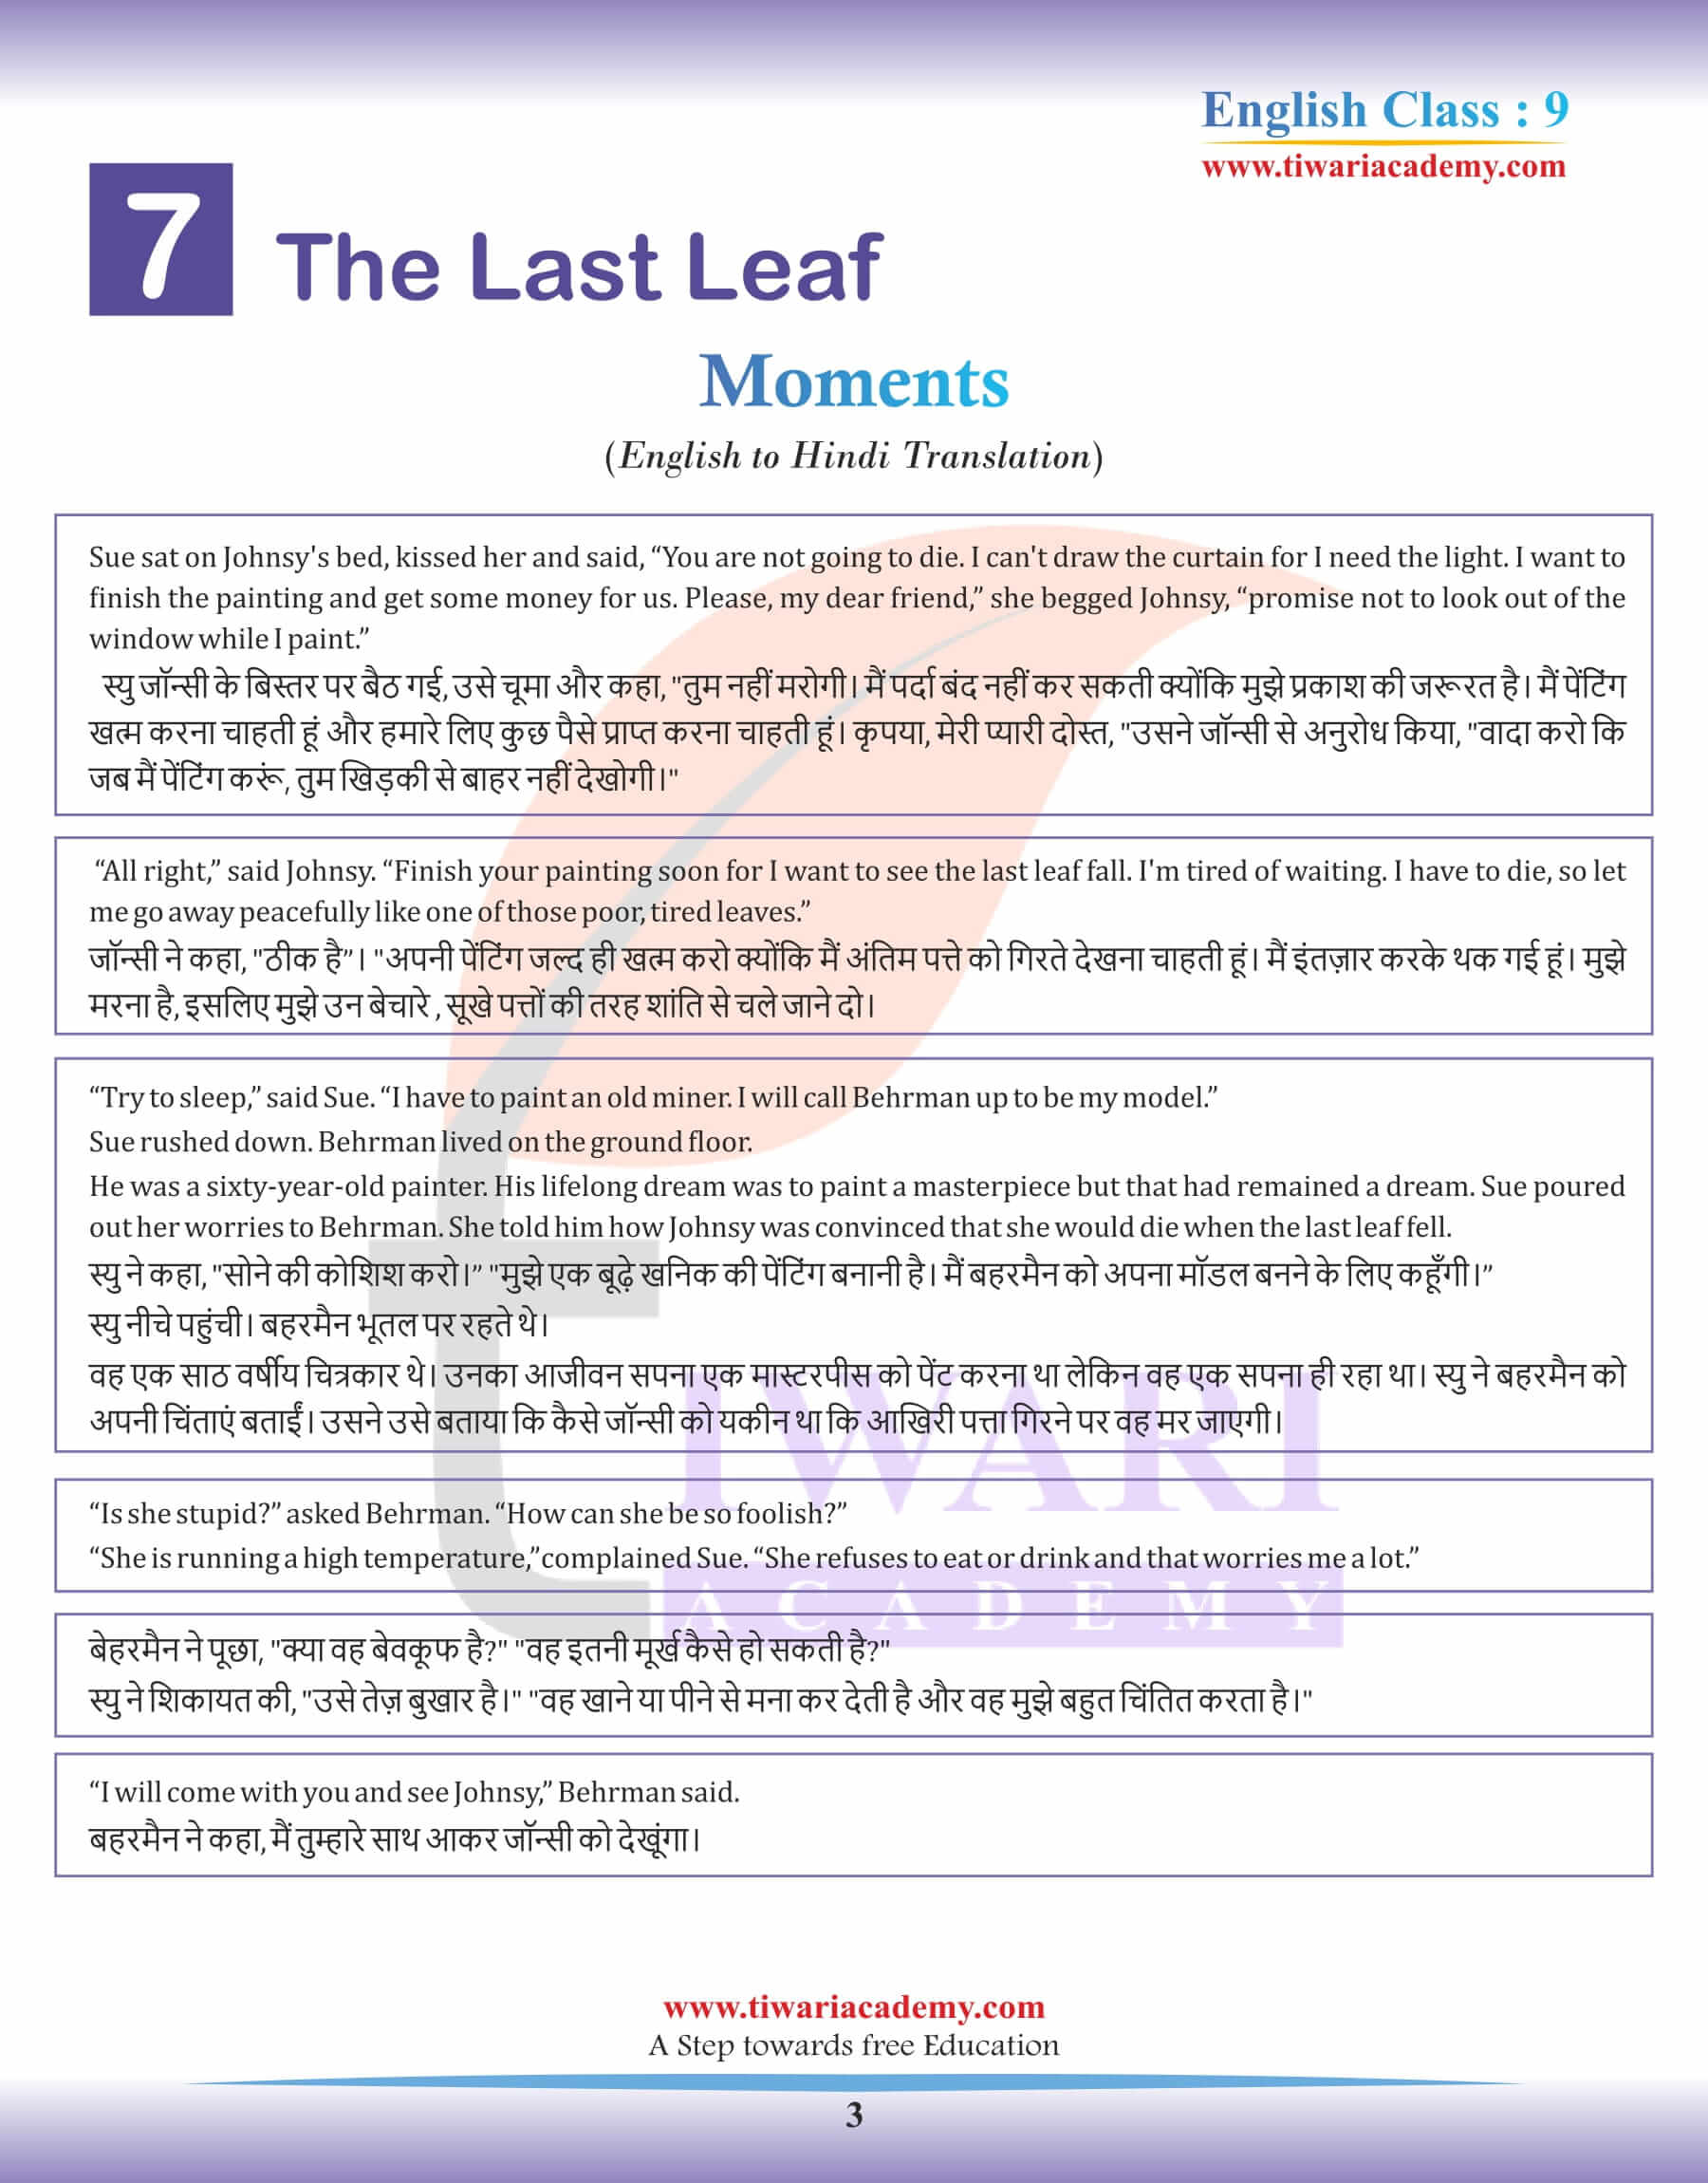 Class 9 English Moments Chapter 7 the Last leaf in Hindi